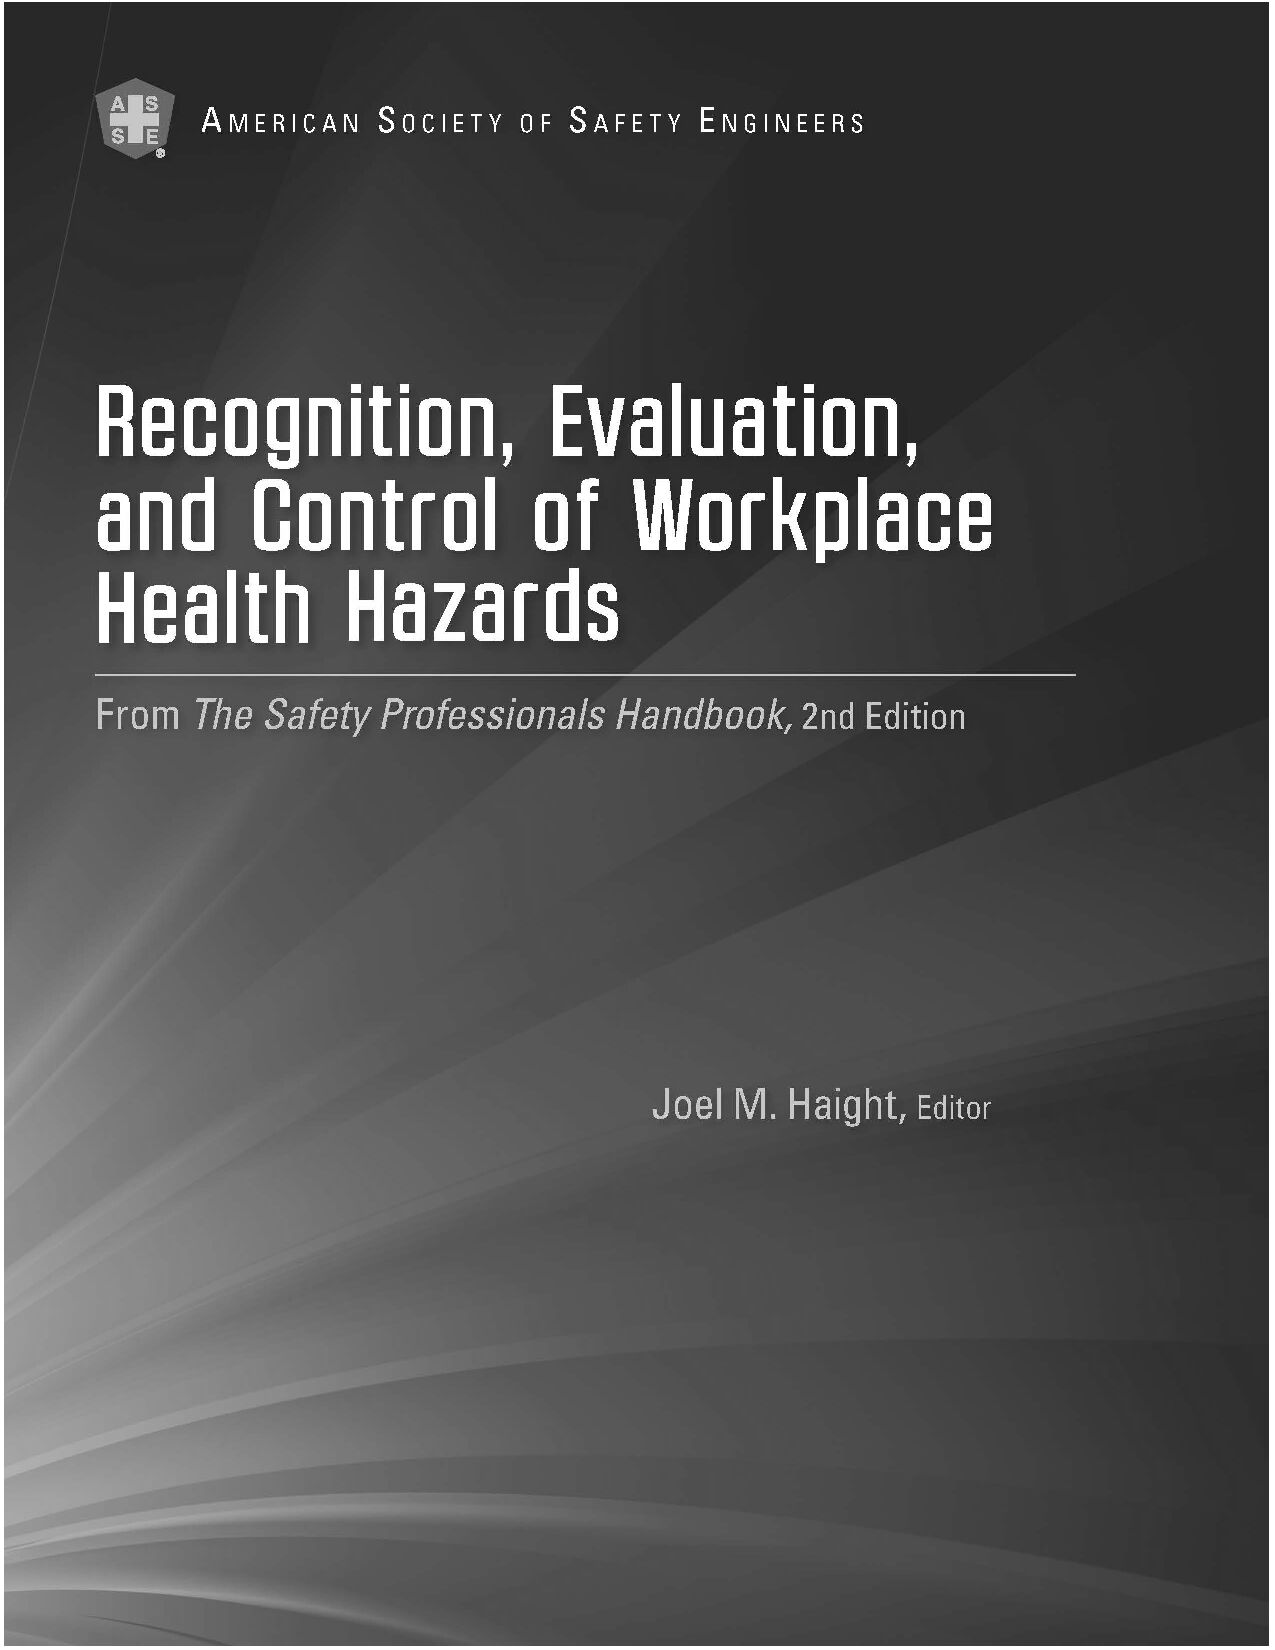 ASSE Recognition, Evaluation & Control of Workplace Health Hazards 2012封面图